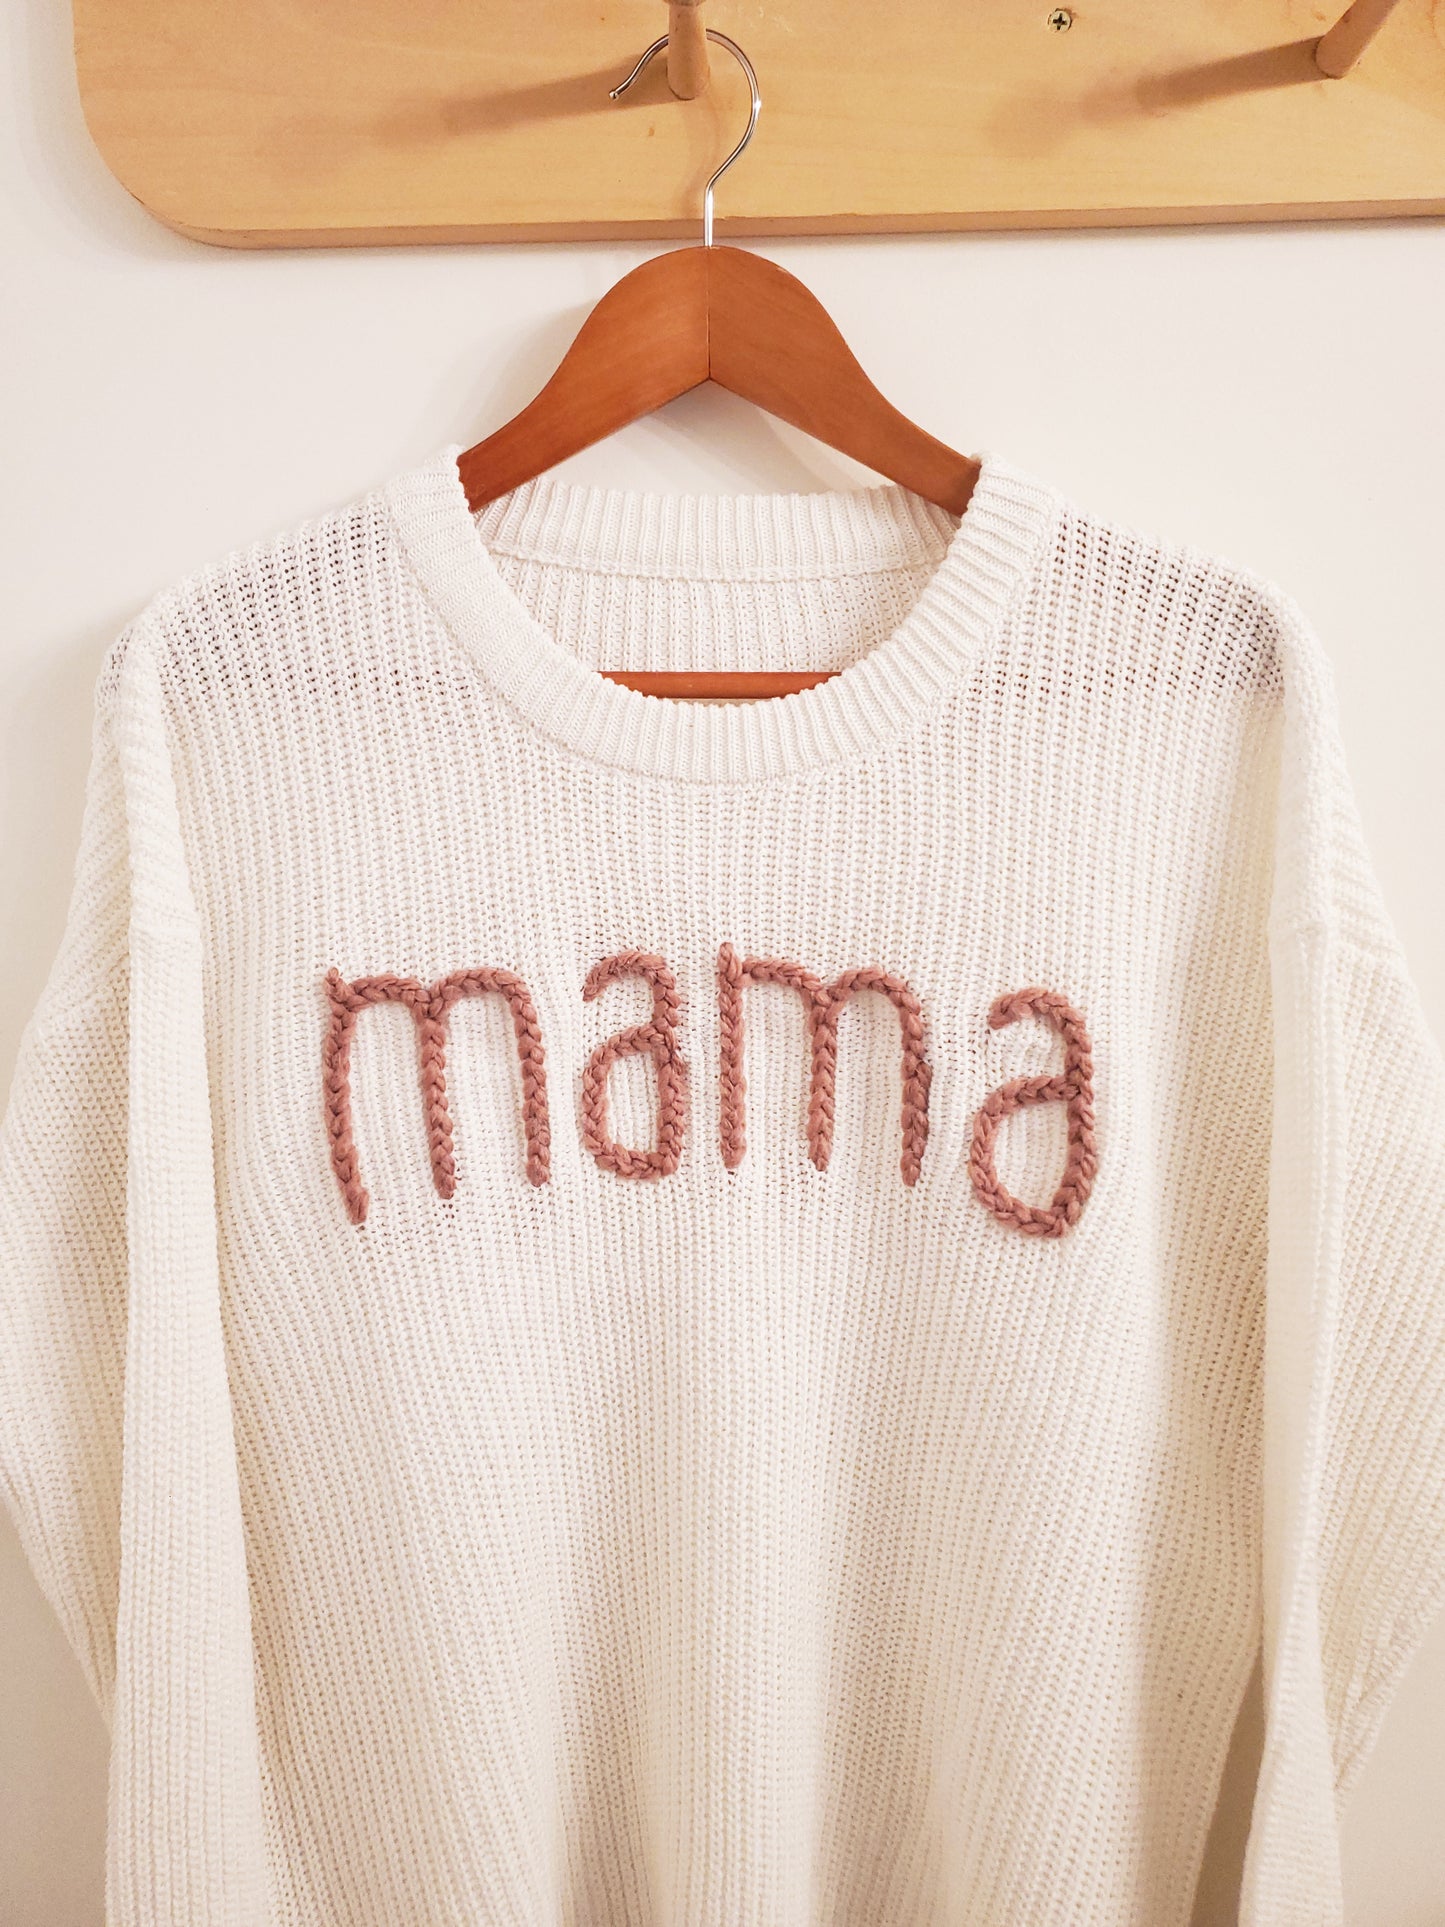 Adult Custom Knit Sweaters in White